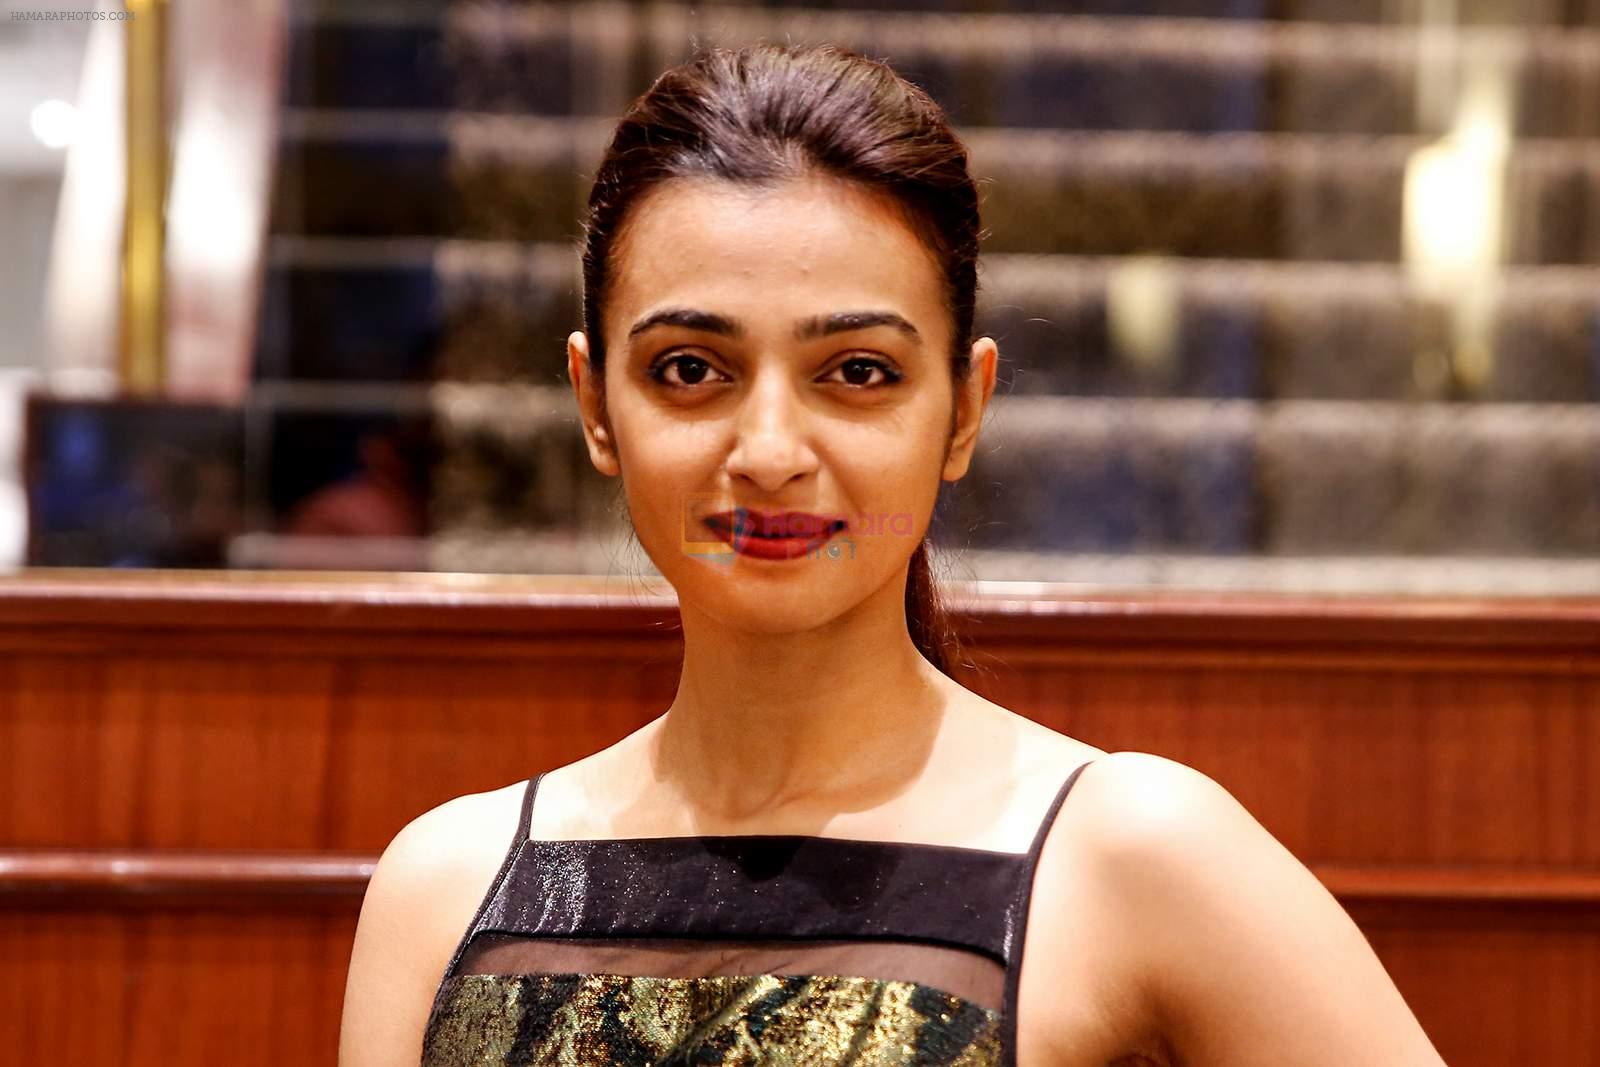 Radhika Apte at Parched premiere at TIFF 2015 on 14th Sept 2015